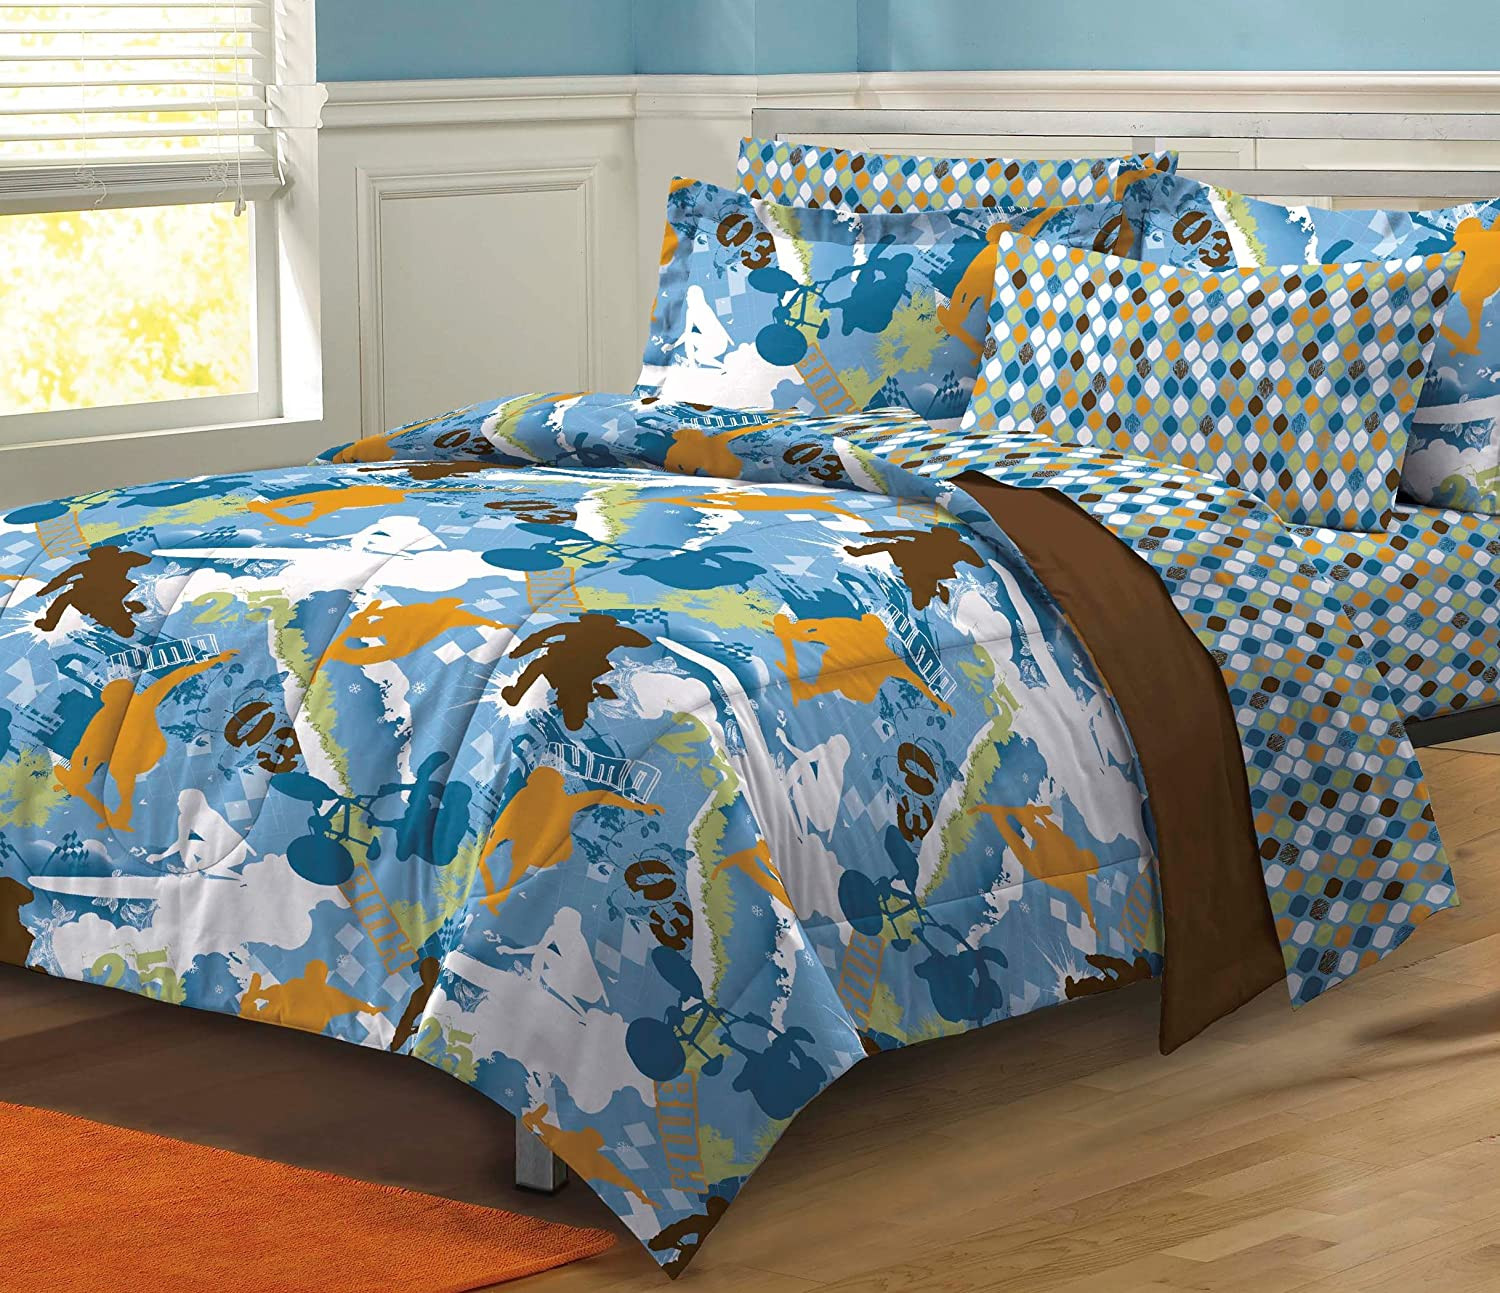 Cheap Boy Bedroom Sets
 Best Cheap Childrens and Teen Twin Boy or Girl Bedding Set